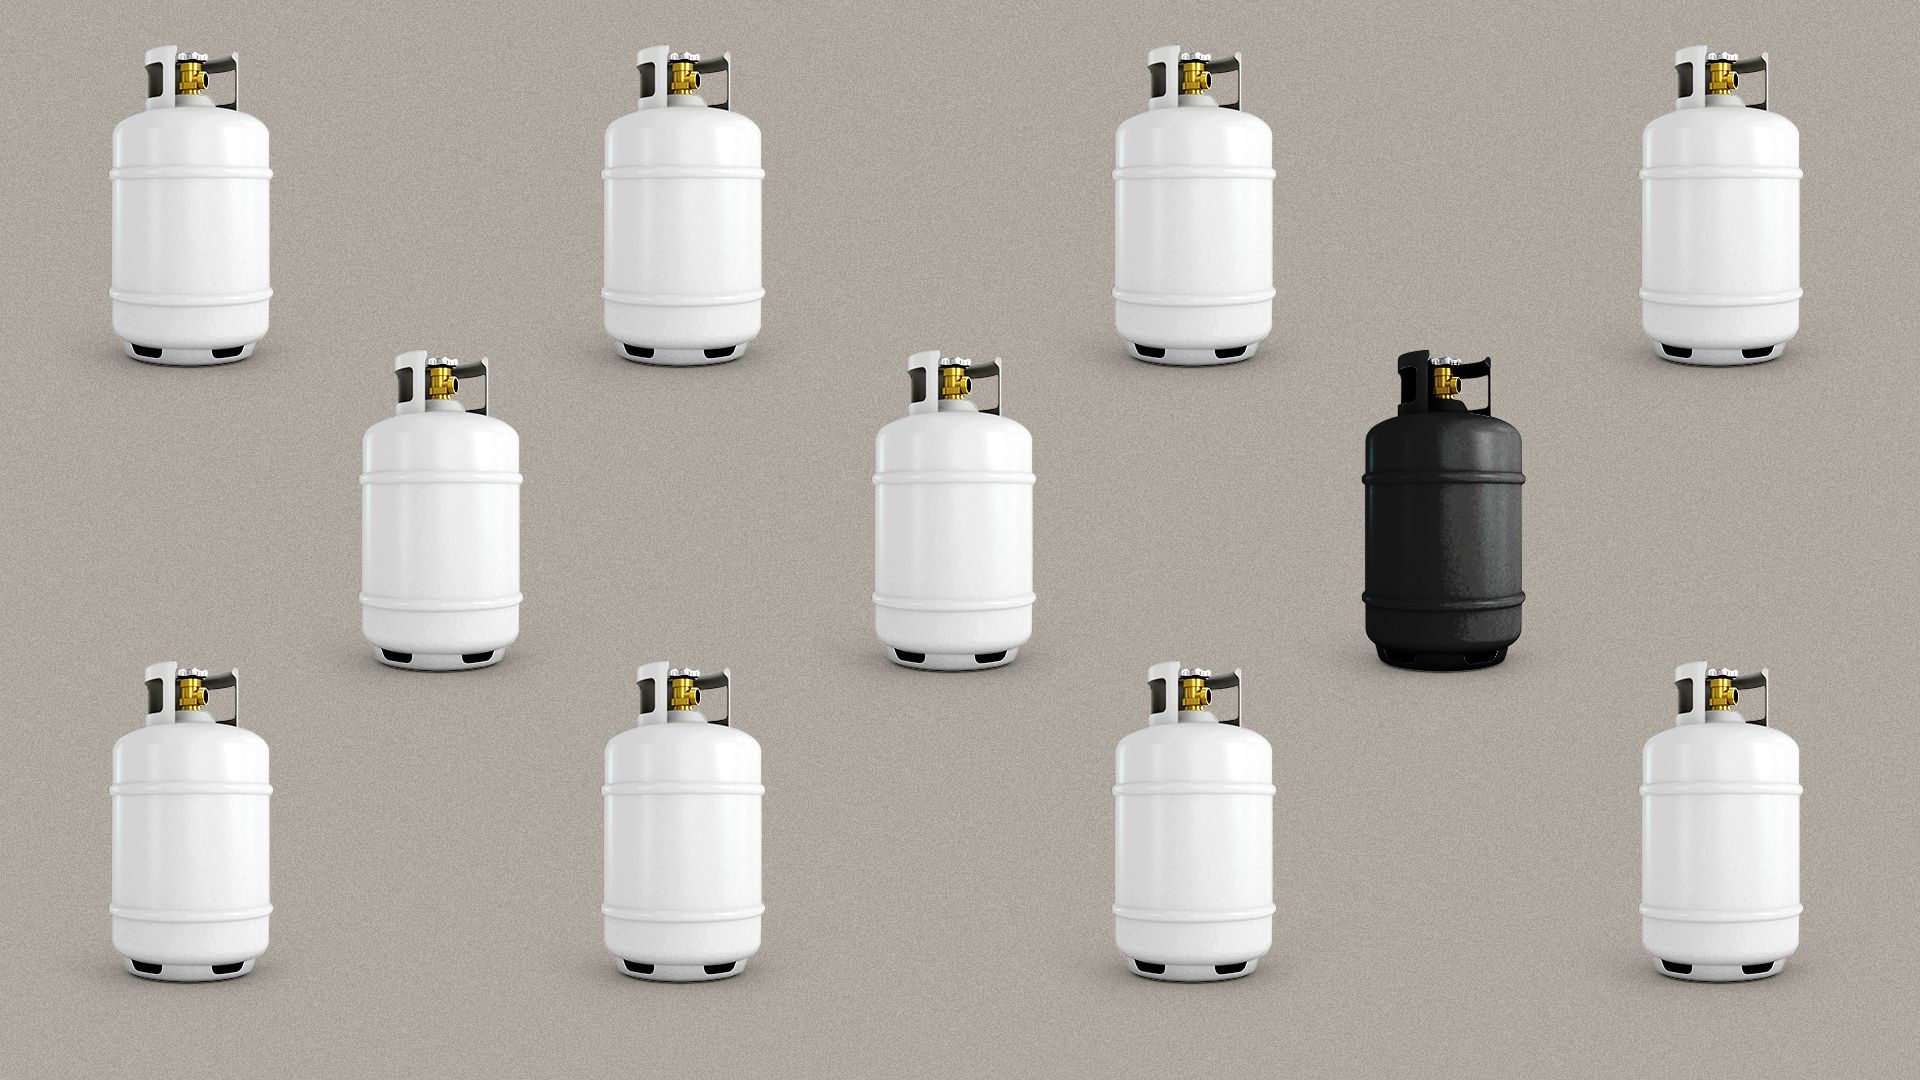 Illustration of a repeating pattern of white propane tanks with a single black propane tank